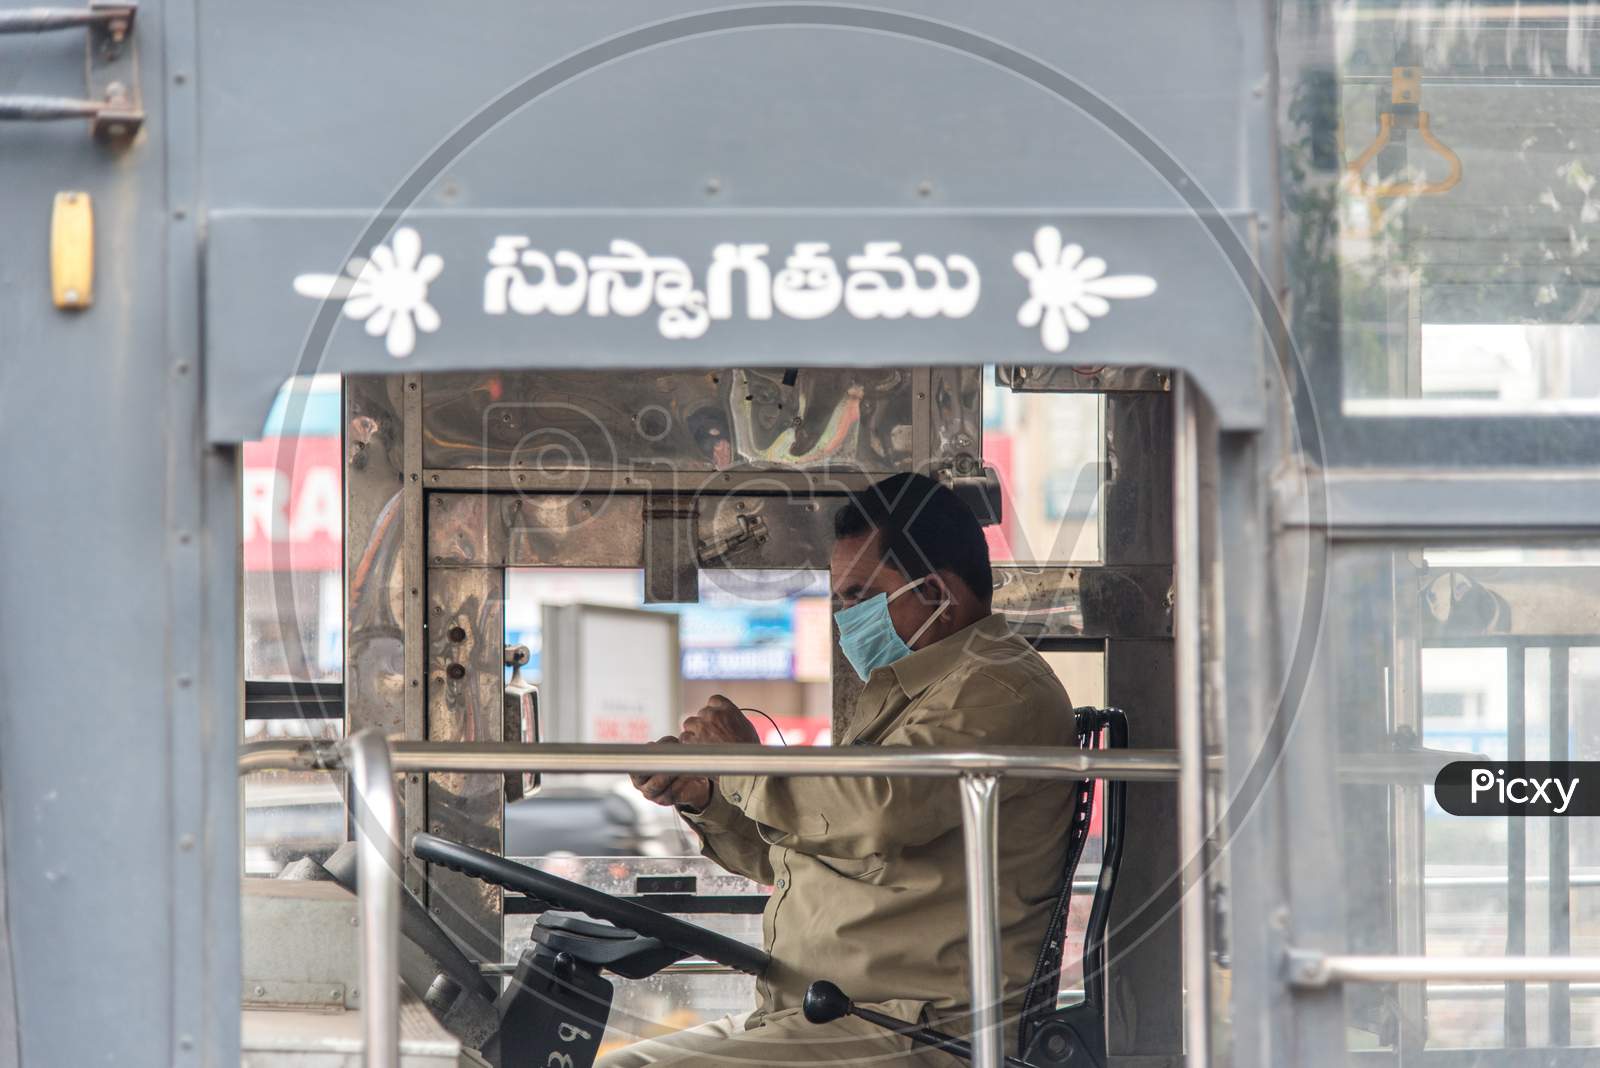 RTC bus driver gearing up